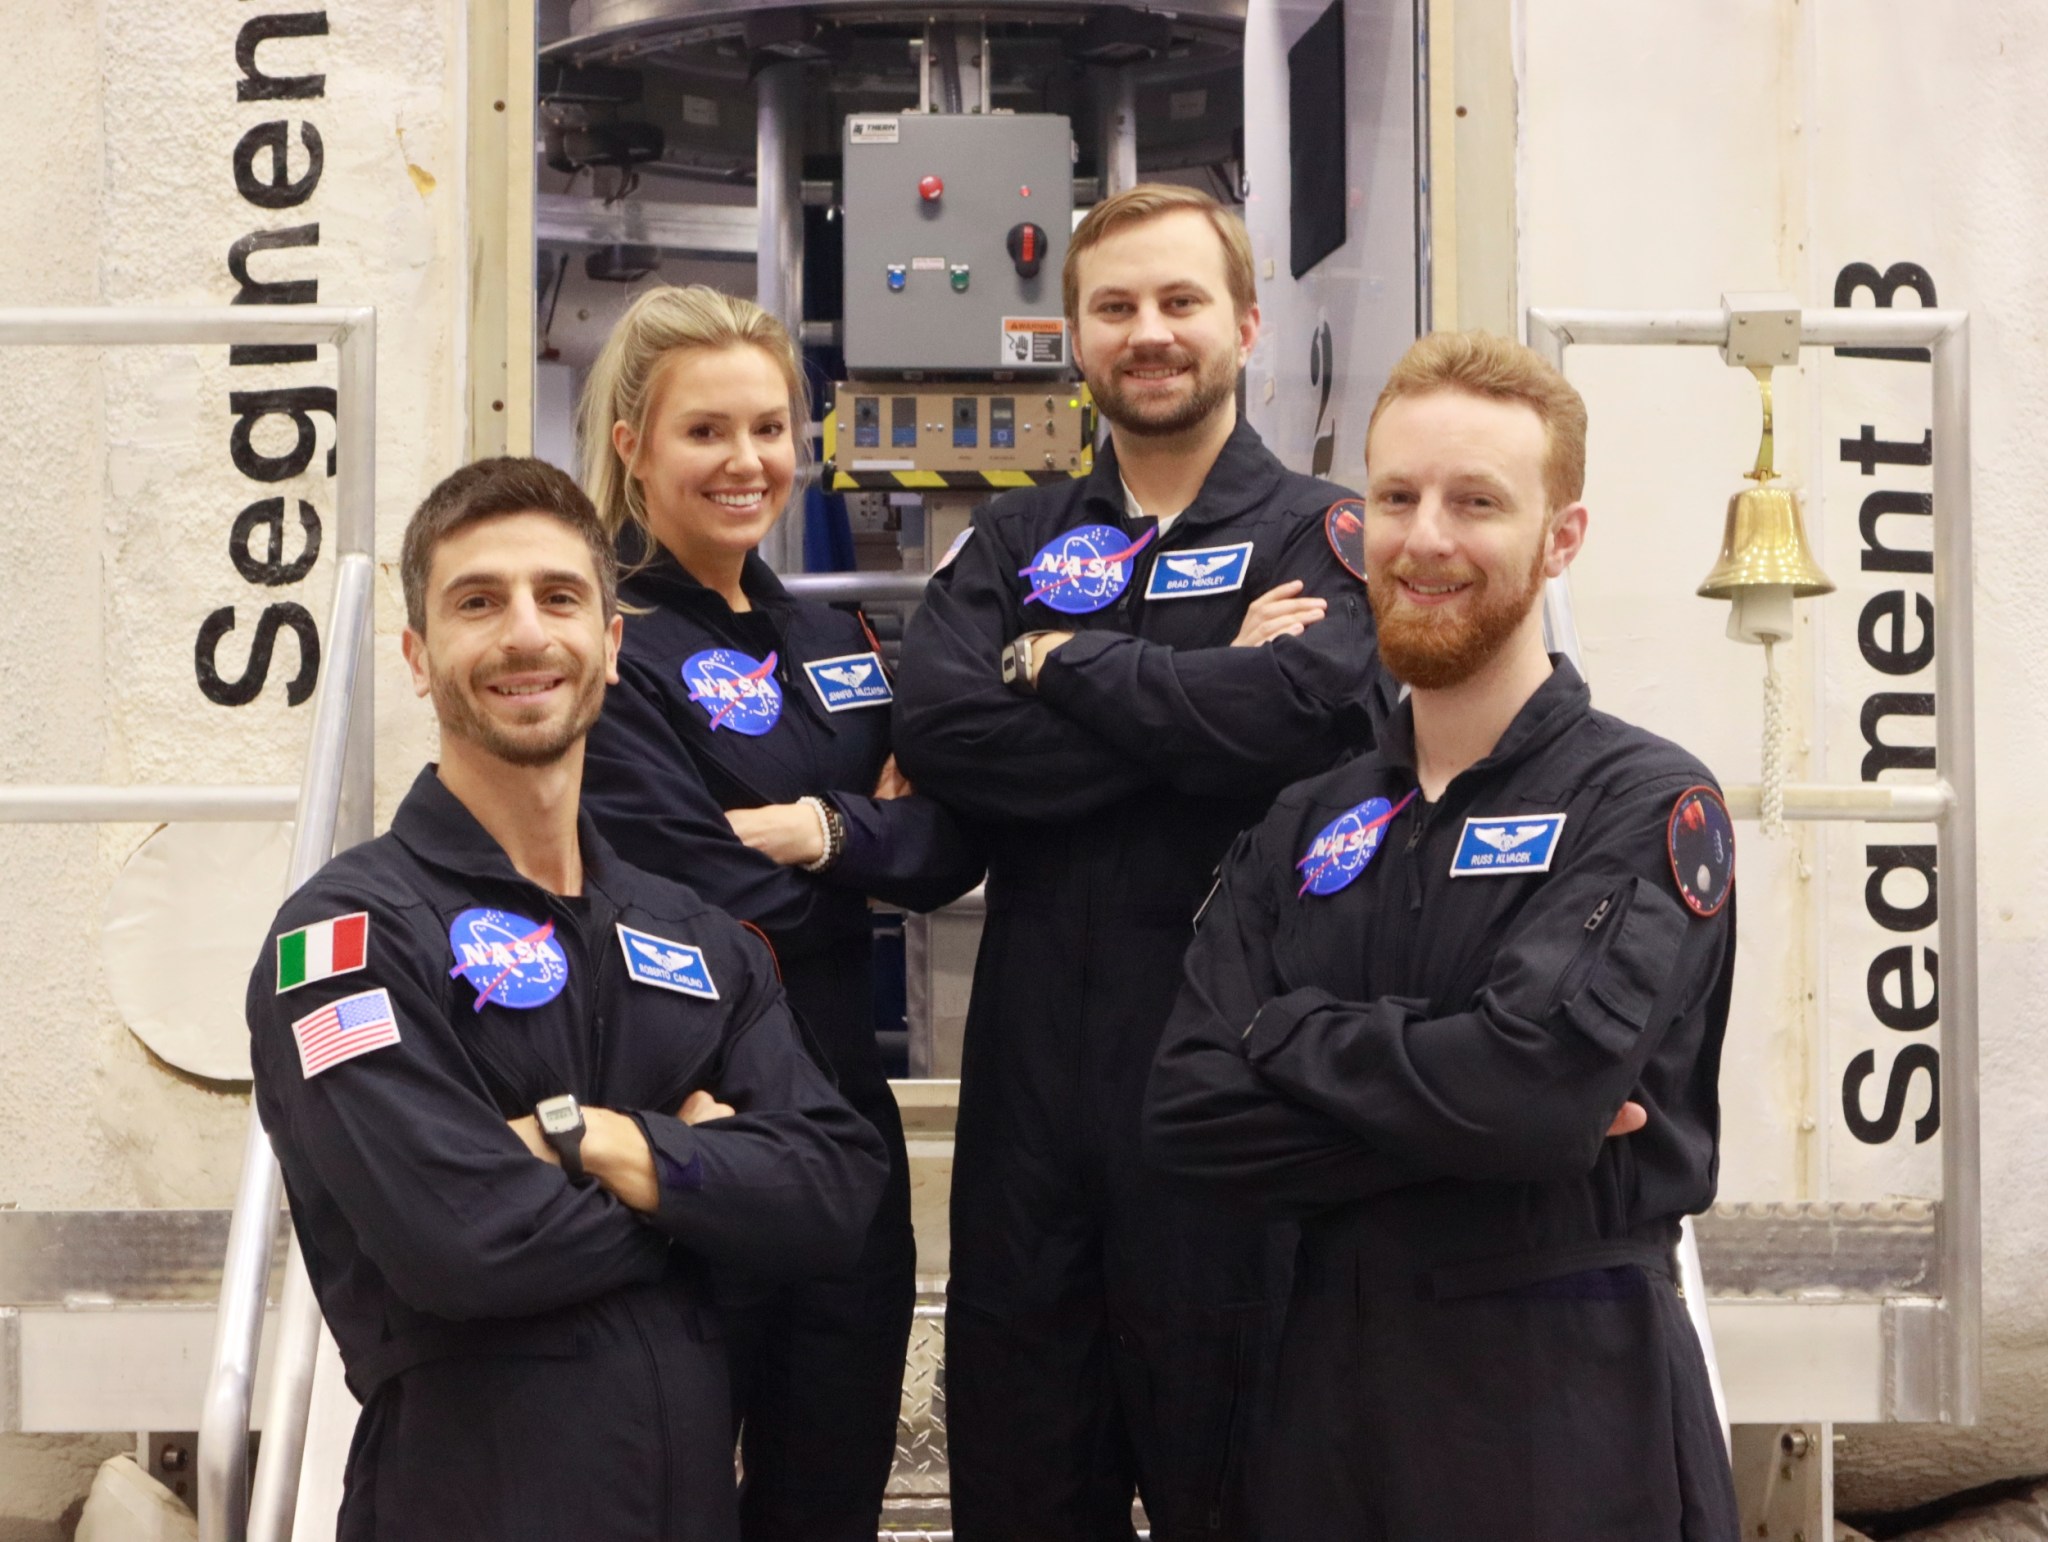 Newly-selected crew for the next mission of NASA's Human Exploration Research Analog. From left to right: Roberto Carlino, Jennifer Milczarski, Brad Hensley, and Russ Klvacek.